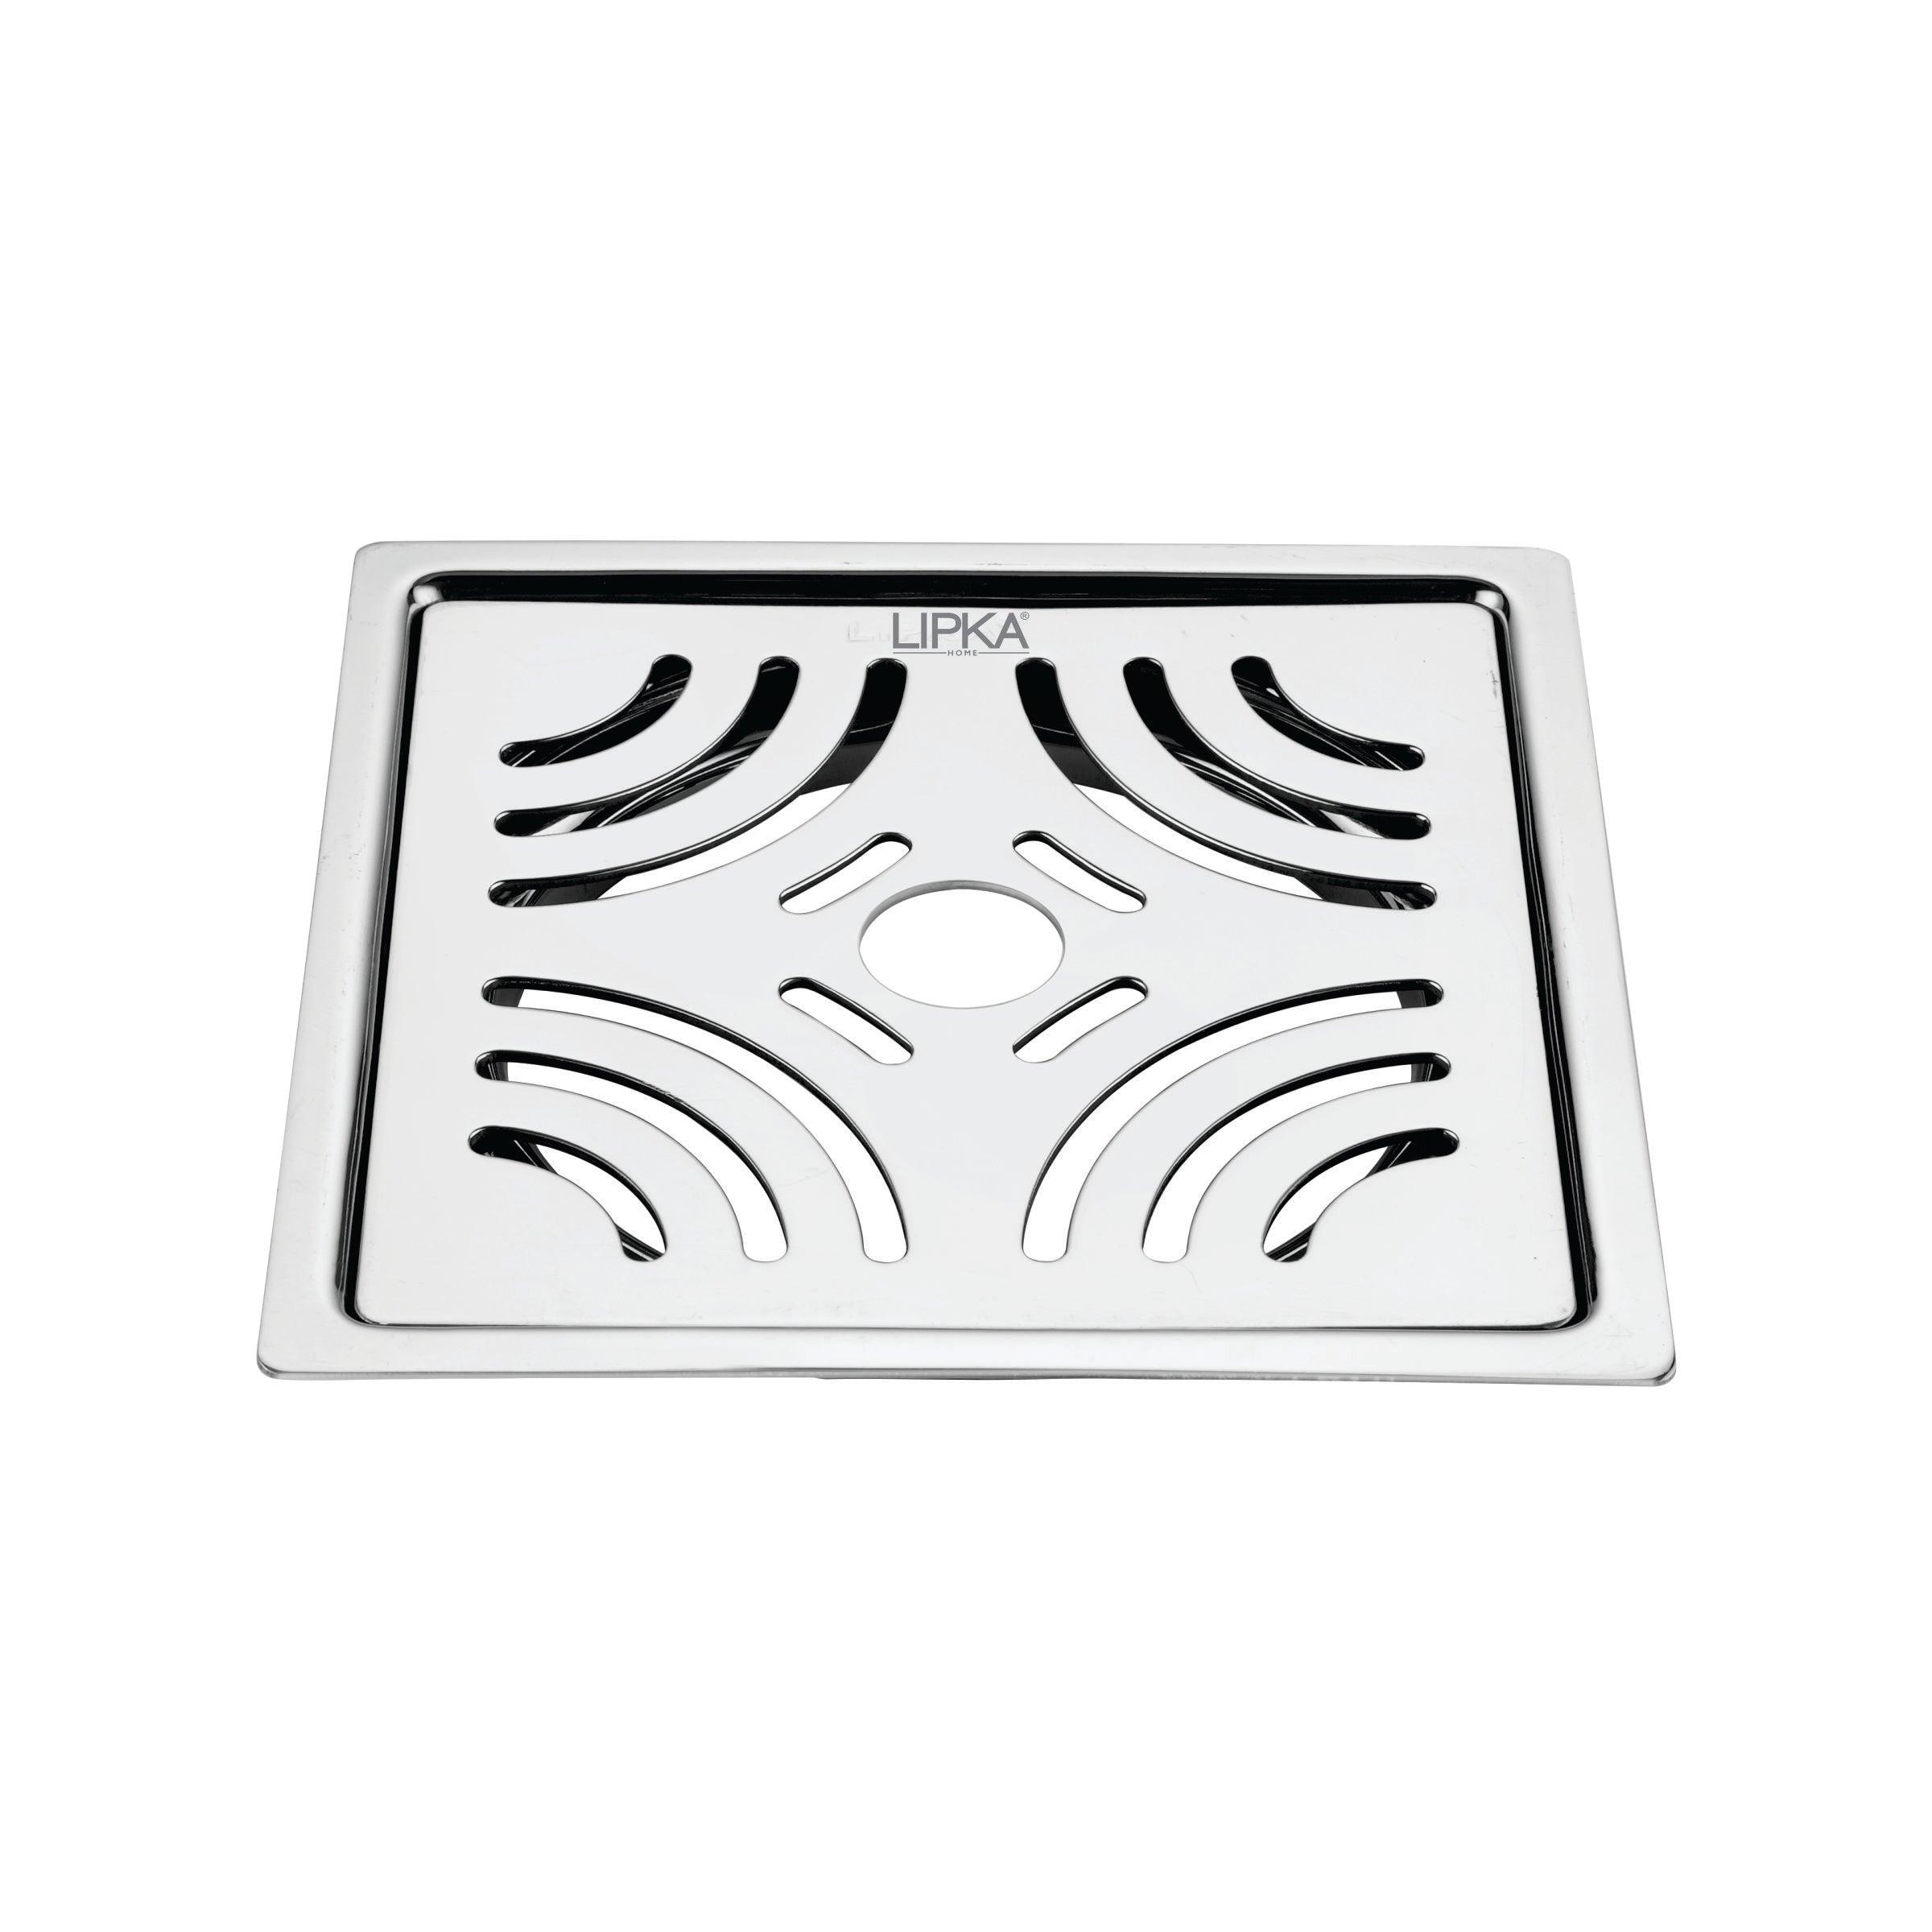 Gamma Deluxe Square Flat Cut Floor Drain (6 x 6 Inches) with Hole